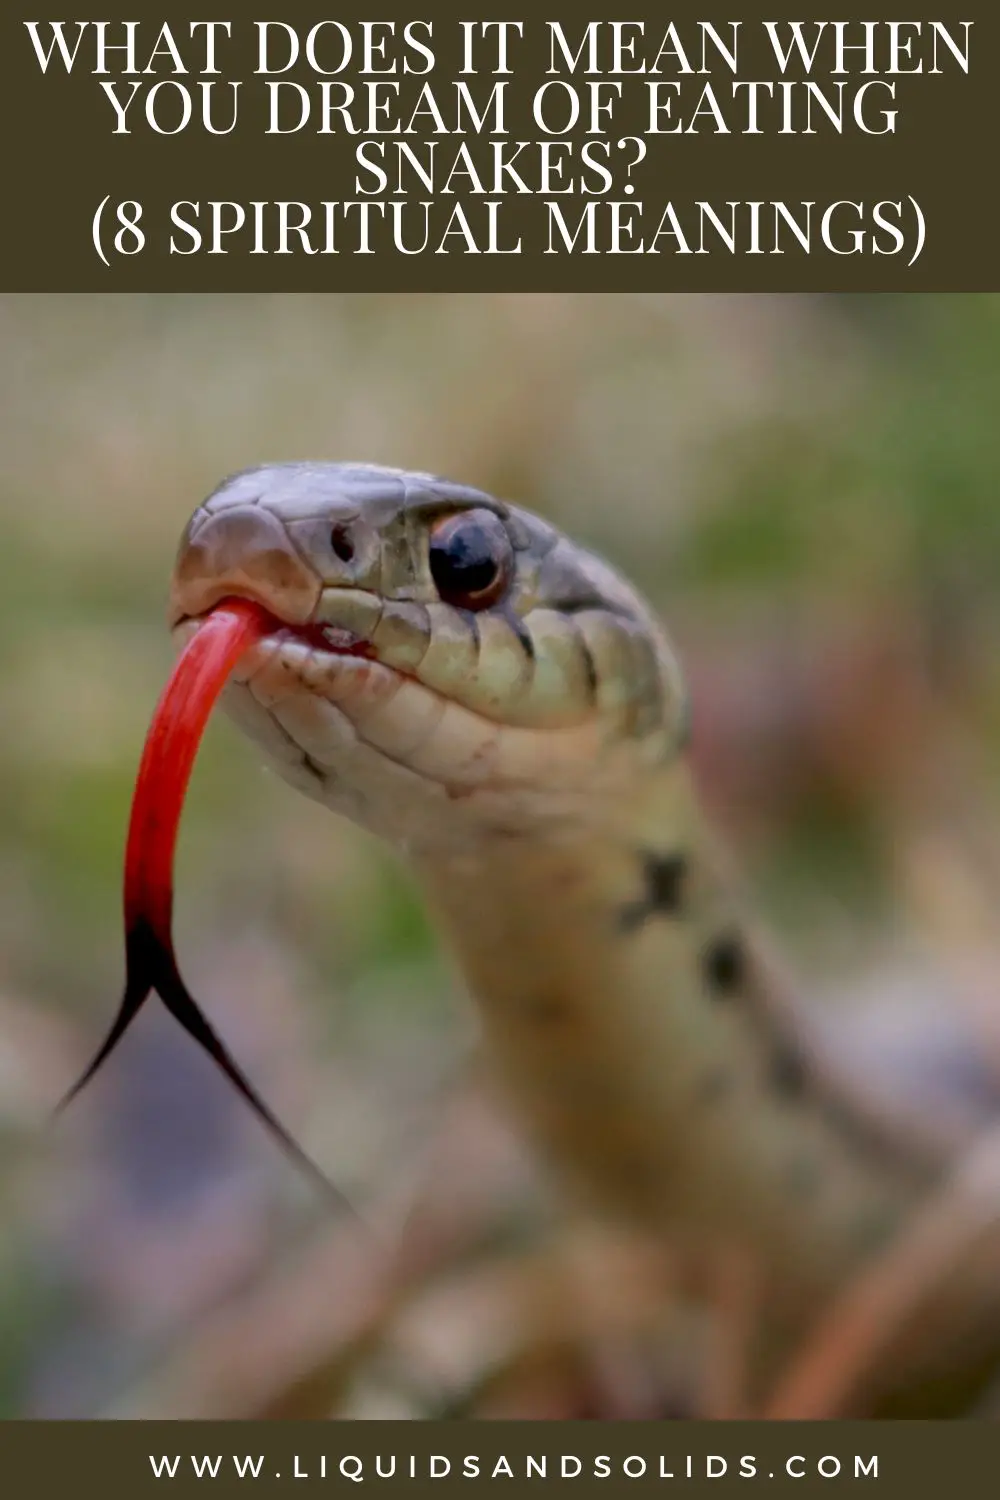 What Does It Mean To Dream About Eating A Snake?